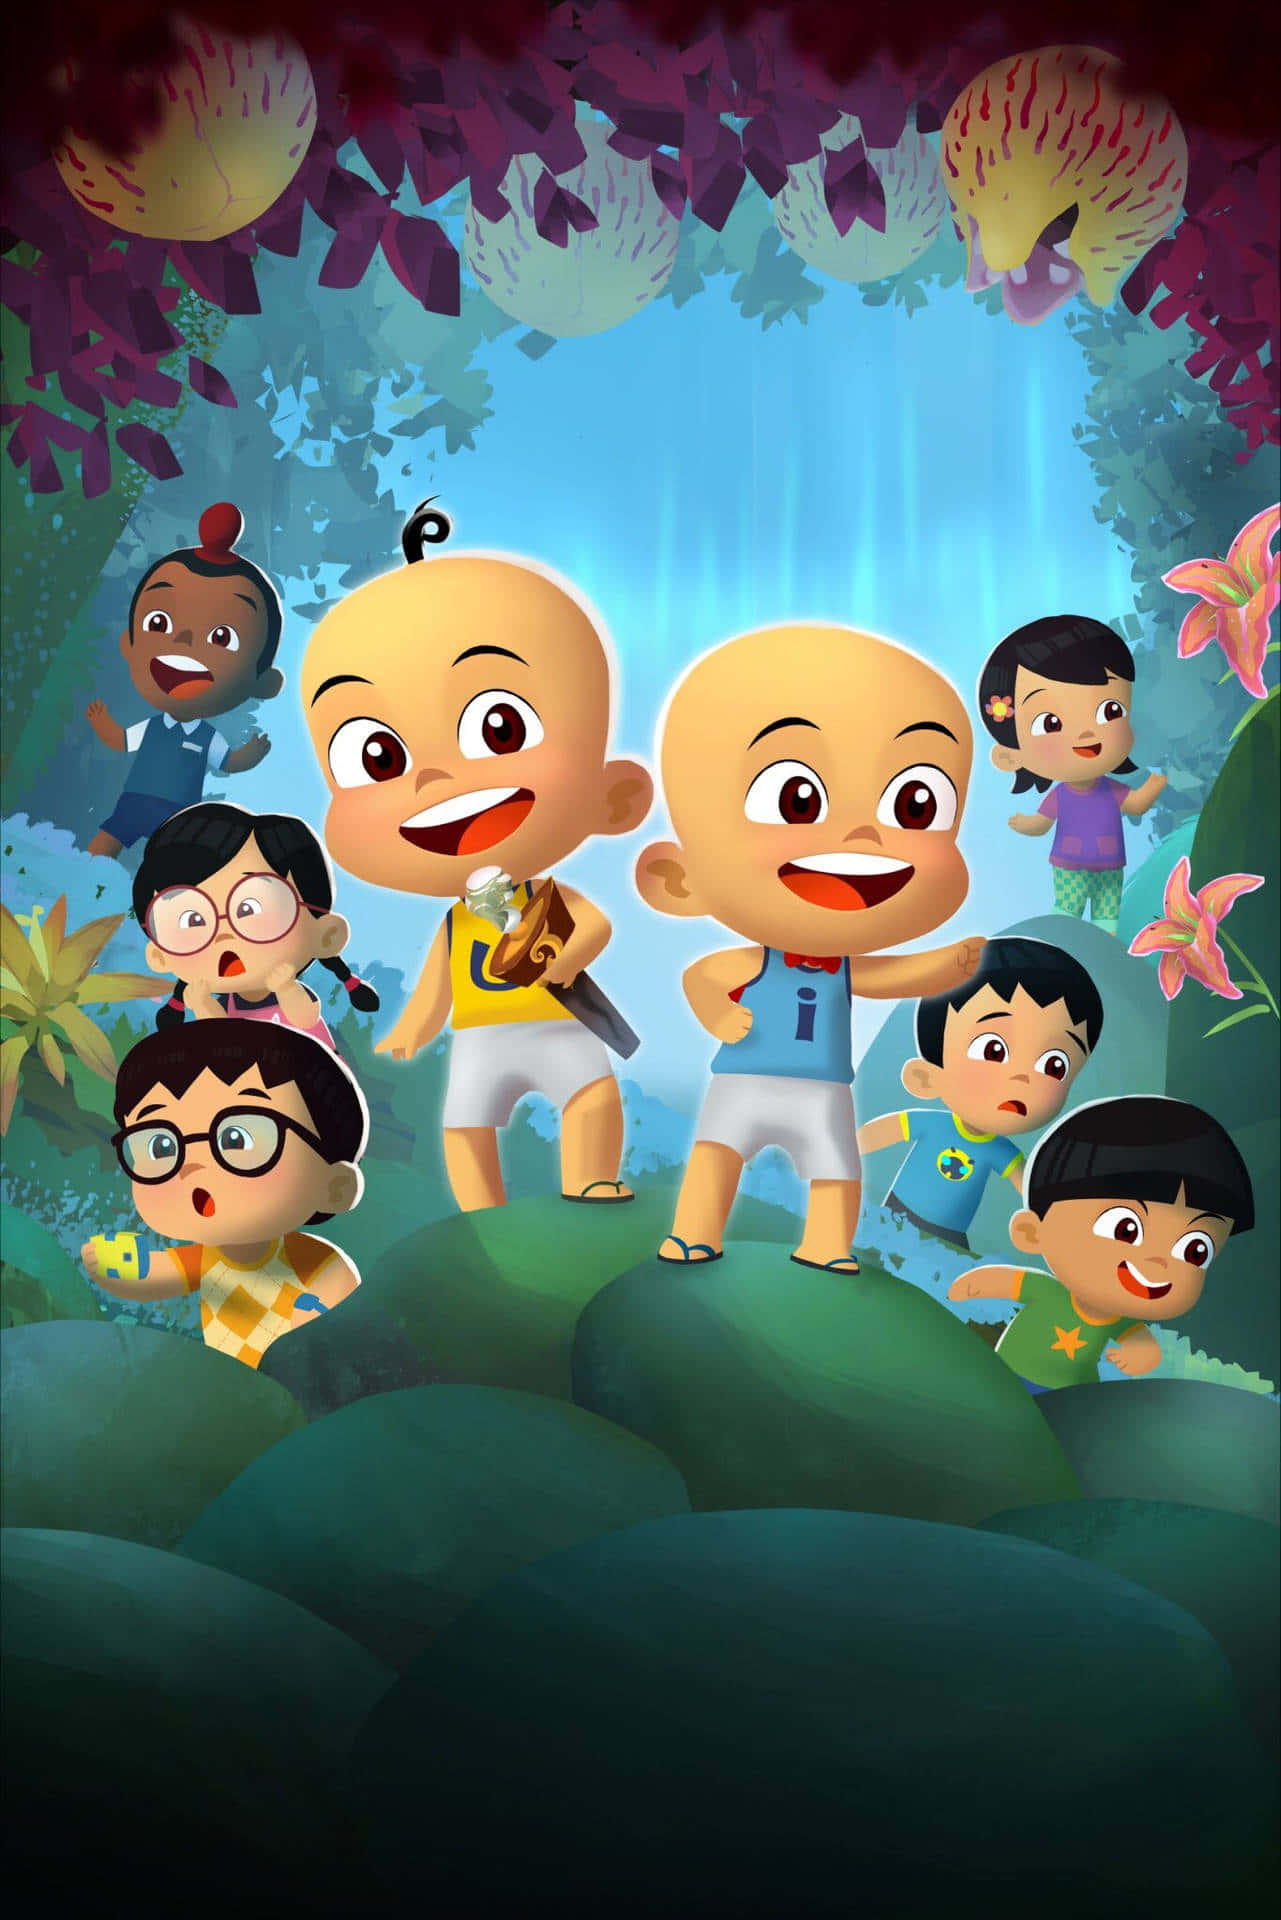 A Cartoon Of Children In A Forest